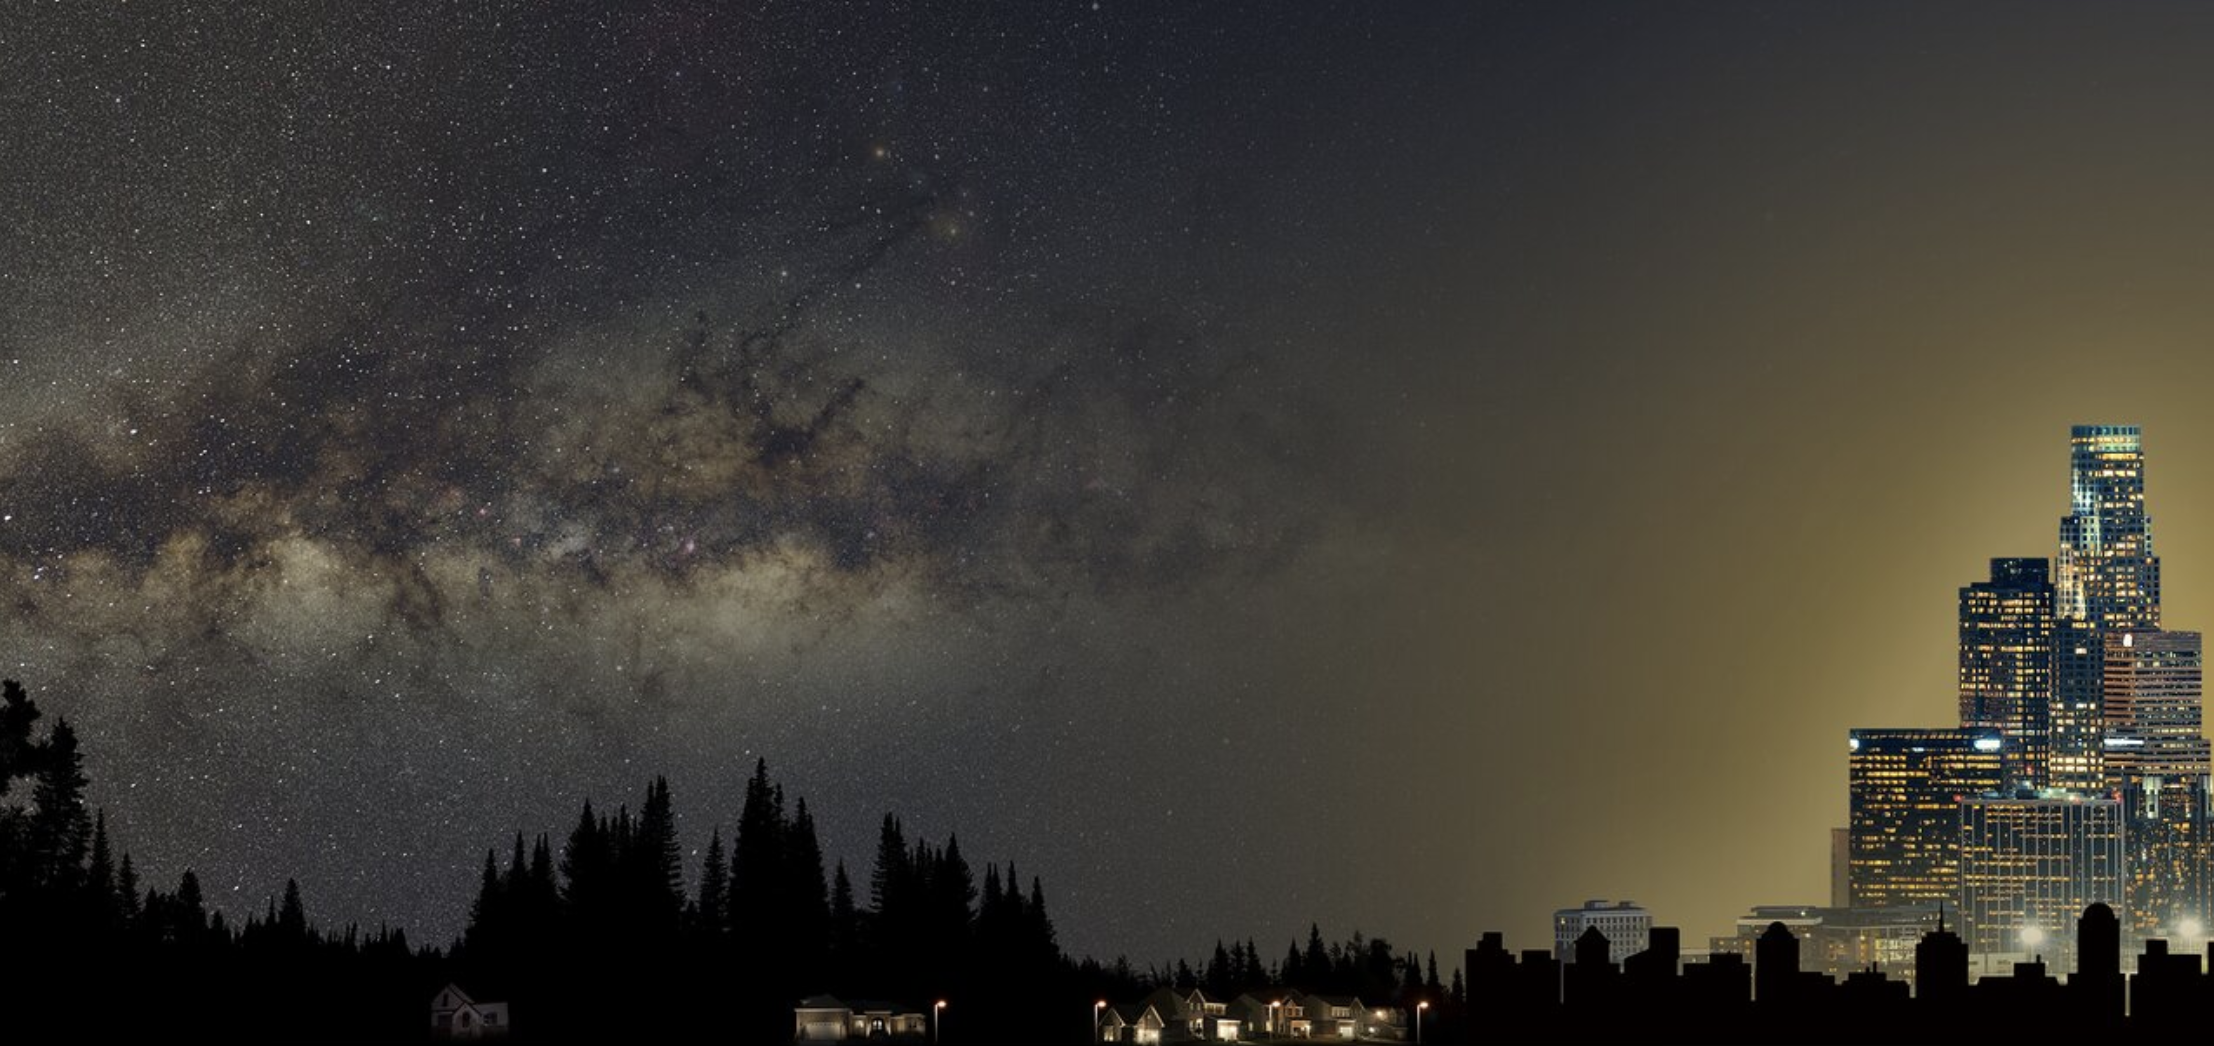 An illustration showing the impact of light pollution. Image Credit: NOIRLab/NSF/AURA, P. Marenfeld.